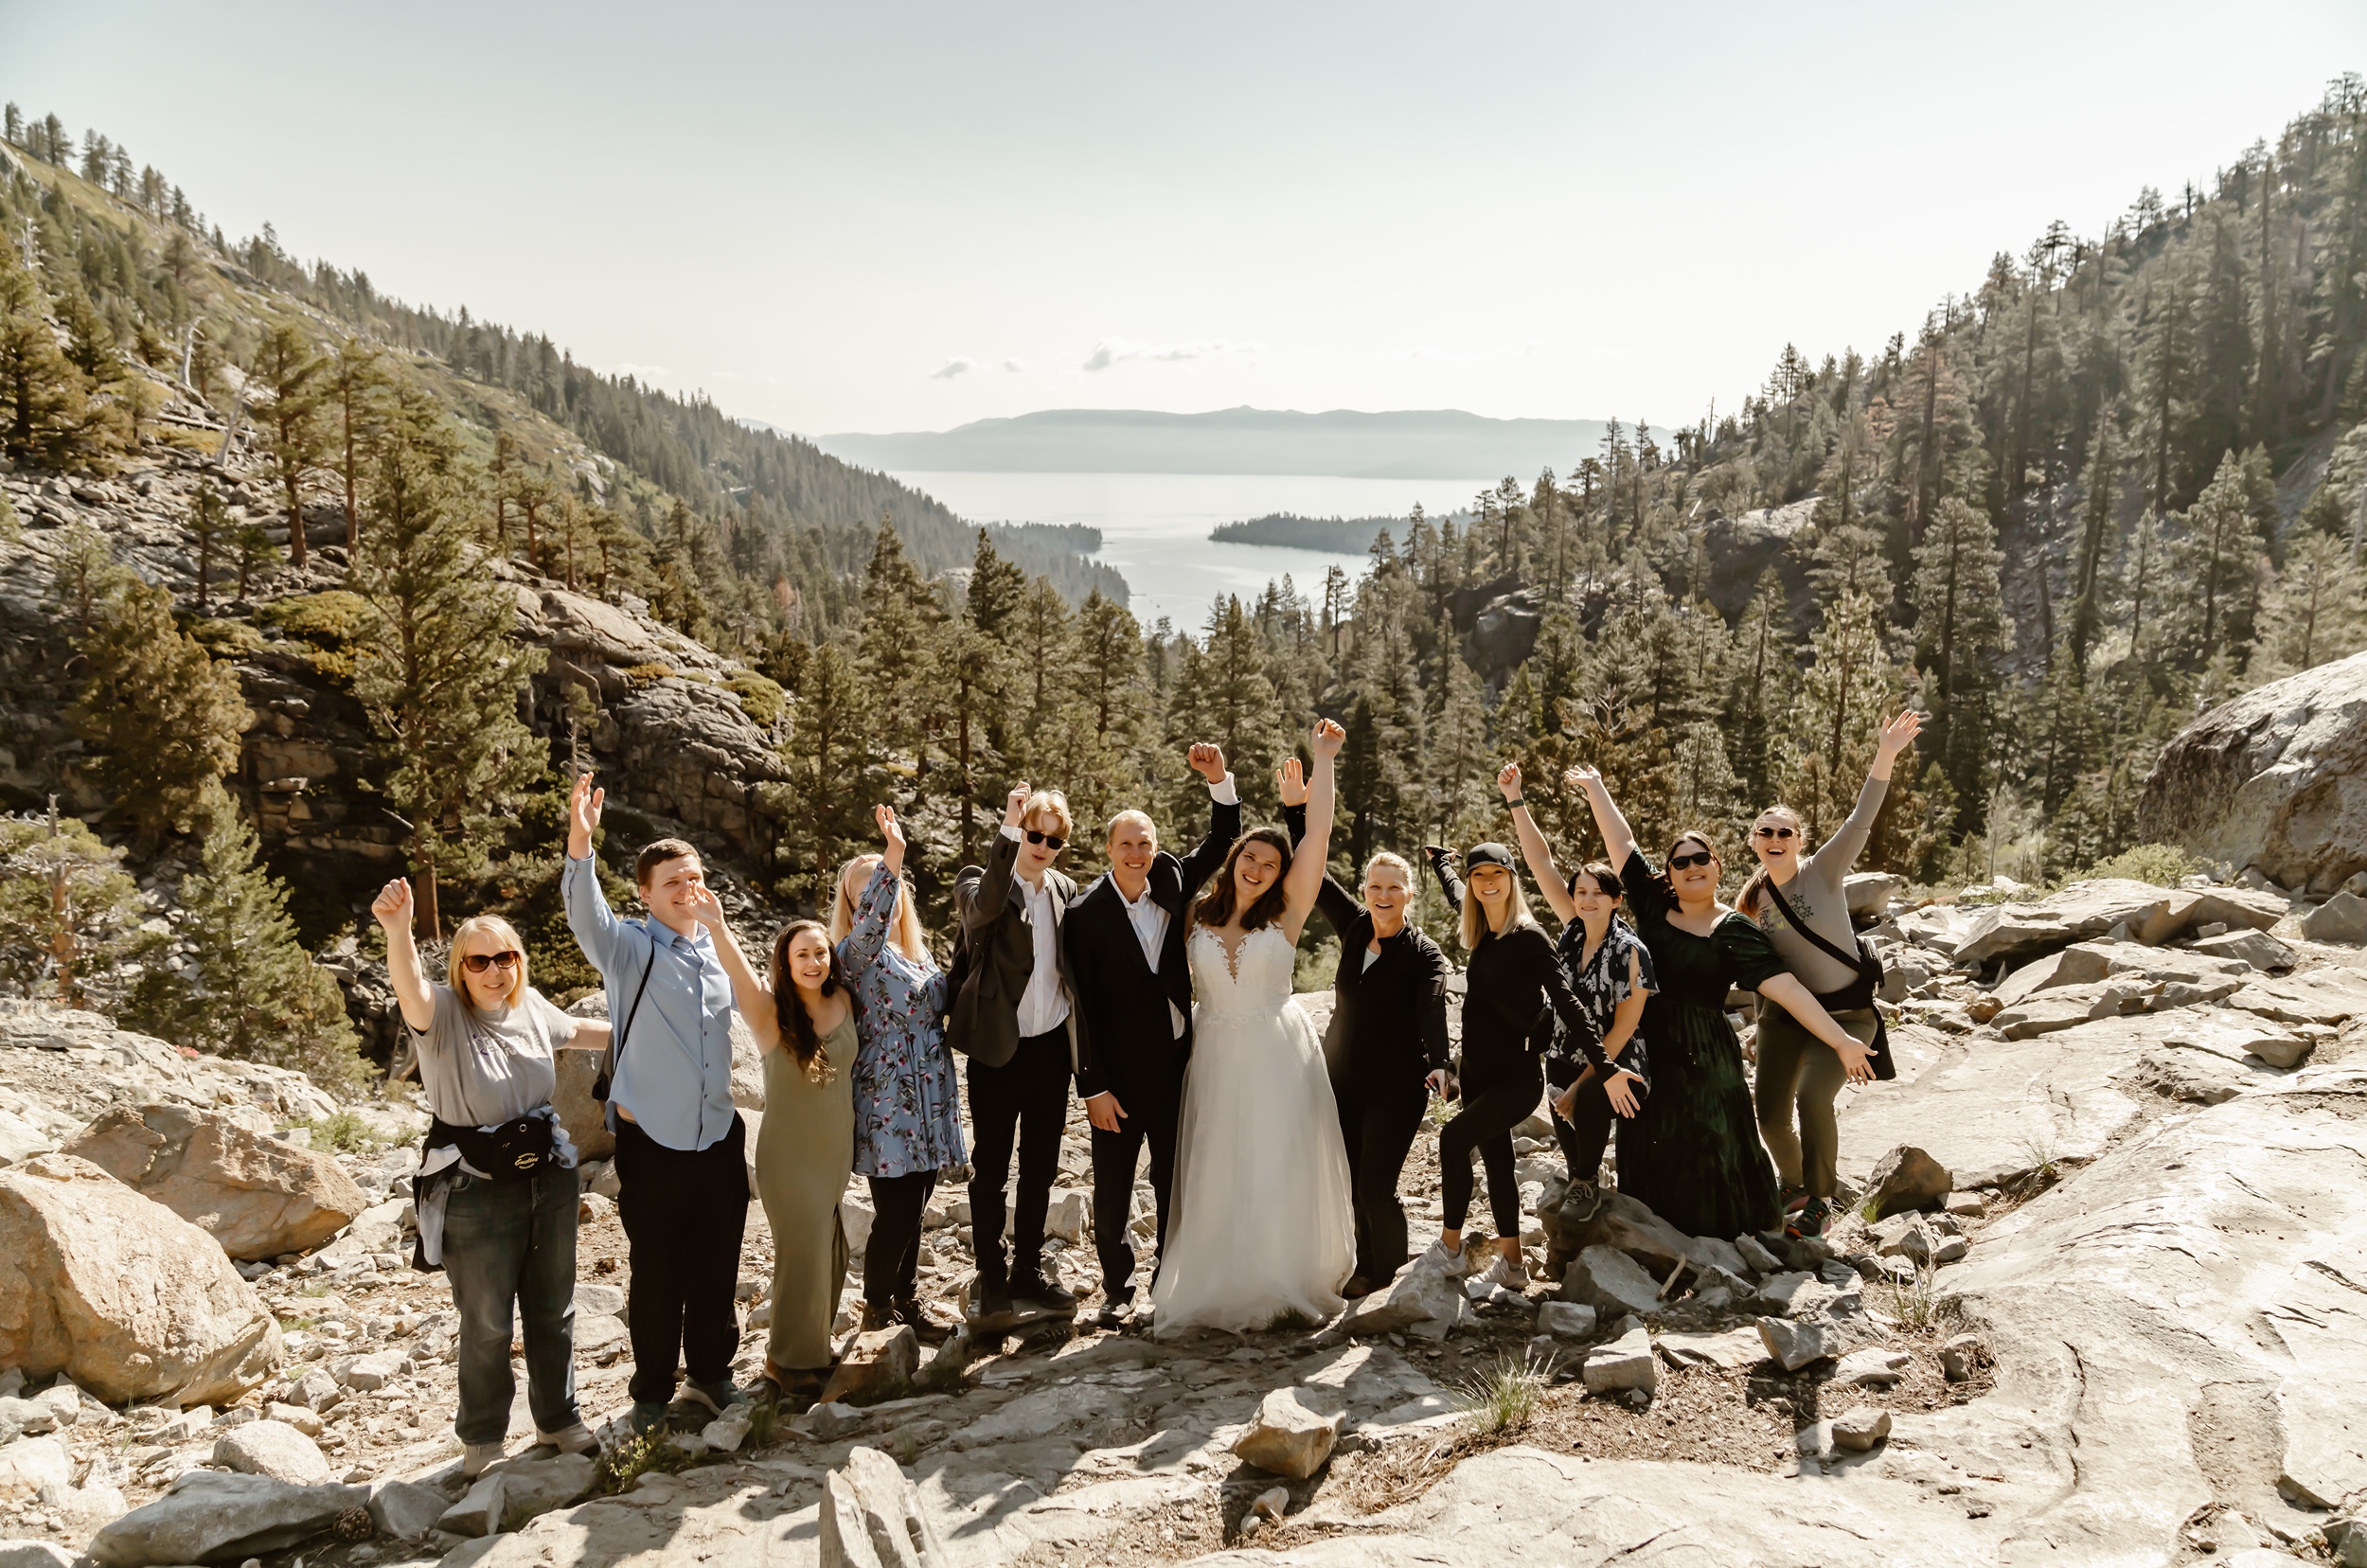 Emerald Bay elopement hike with friends and family